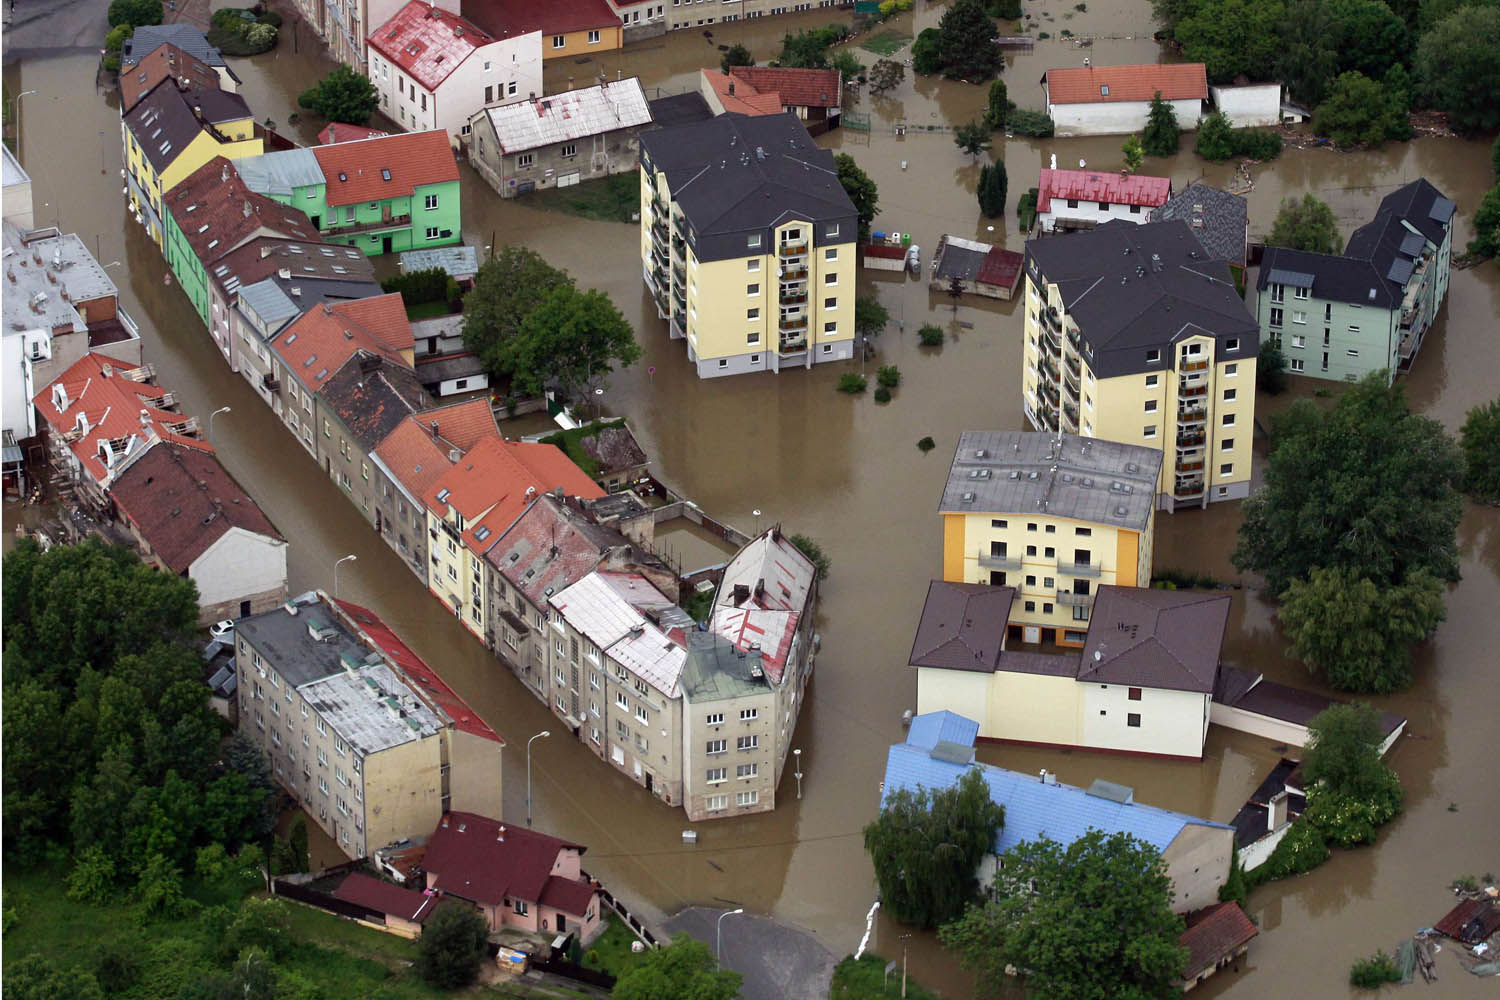 An aerial view shows the flooded city of Kralupy nad Vltavou